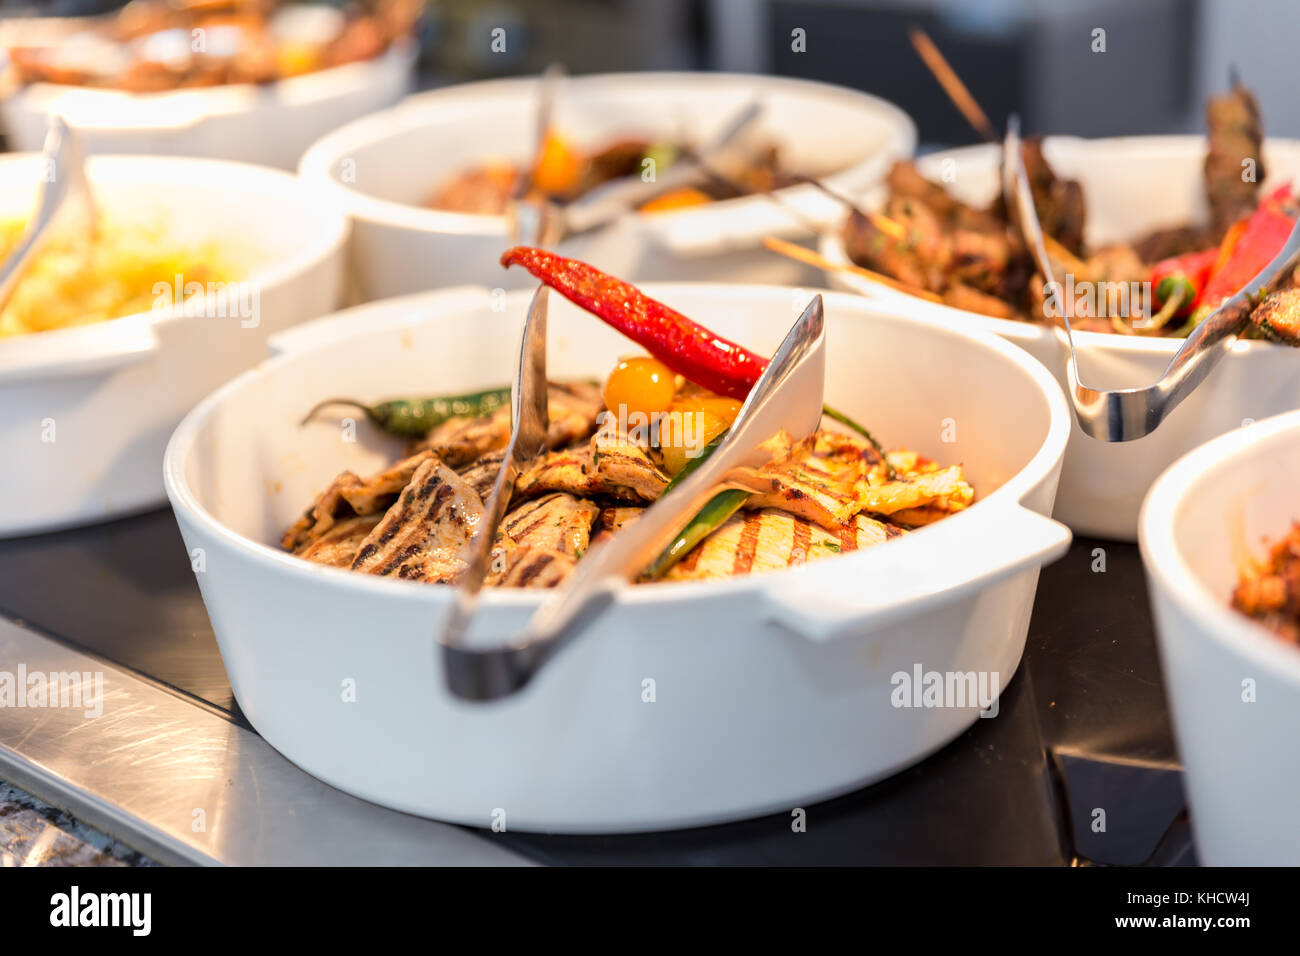 Food buffet in a hotel Stock Photo